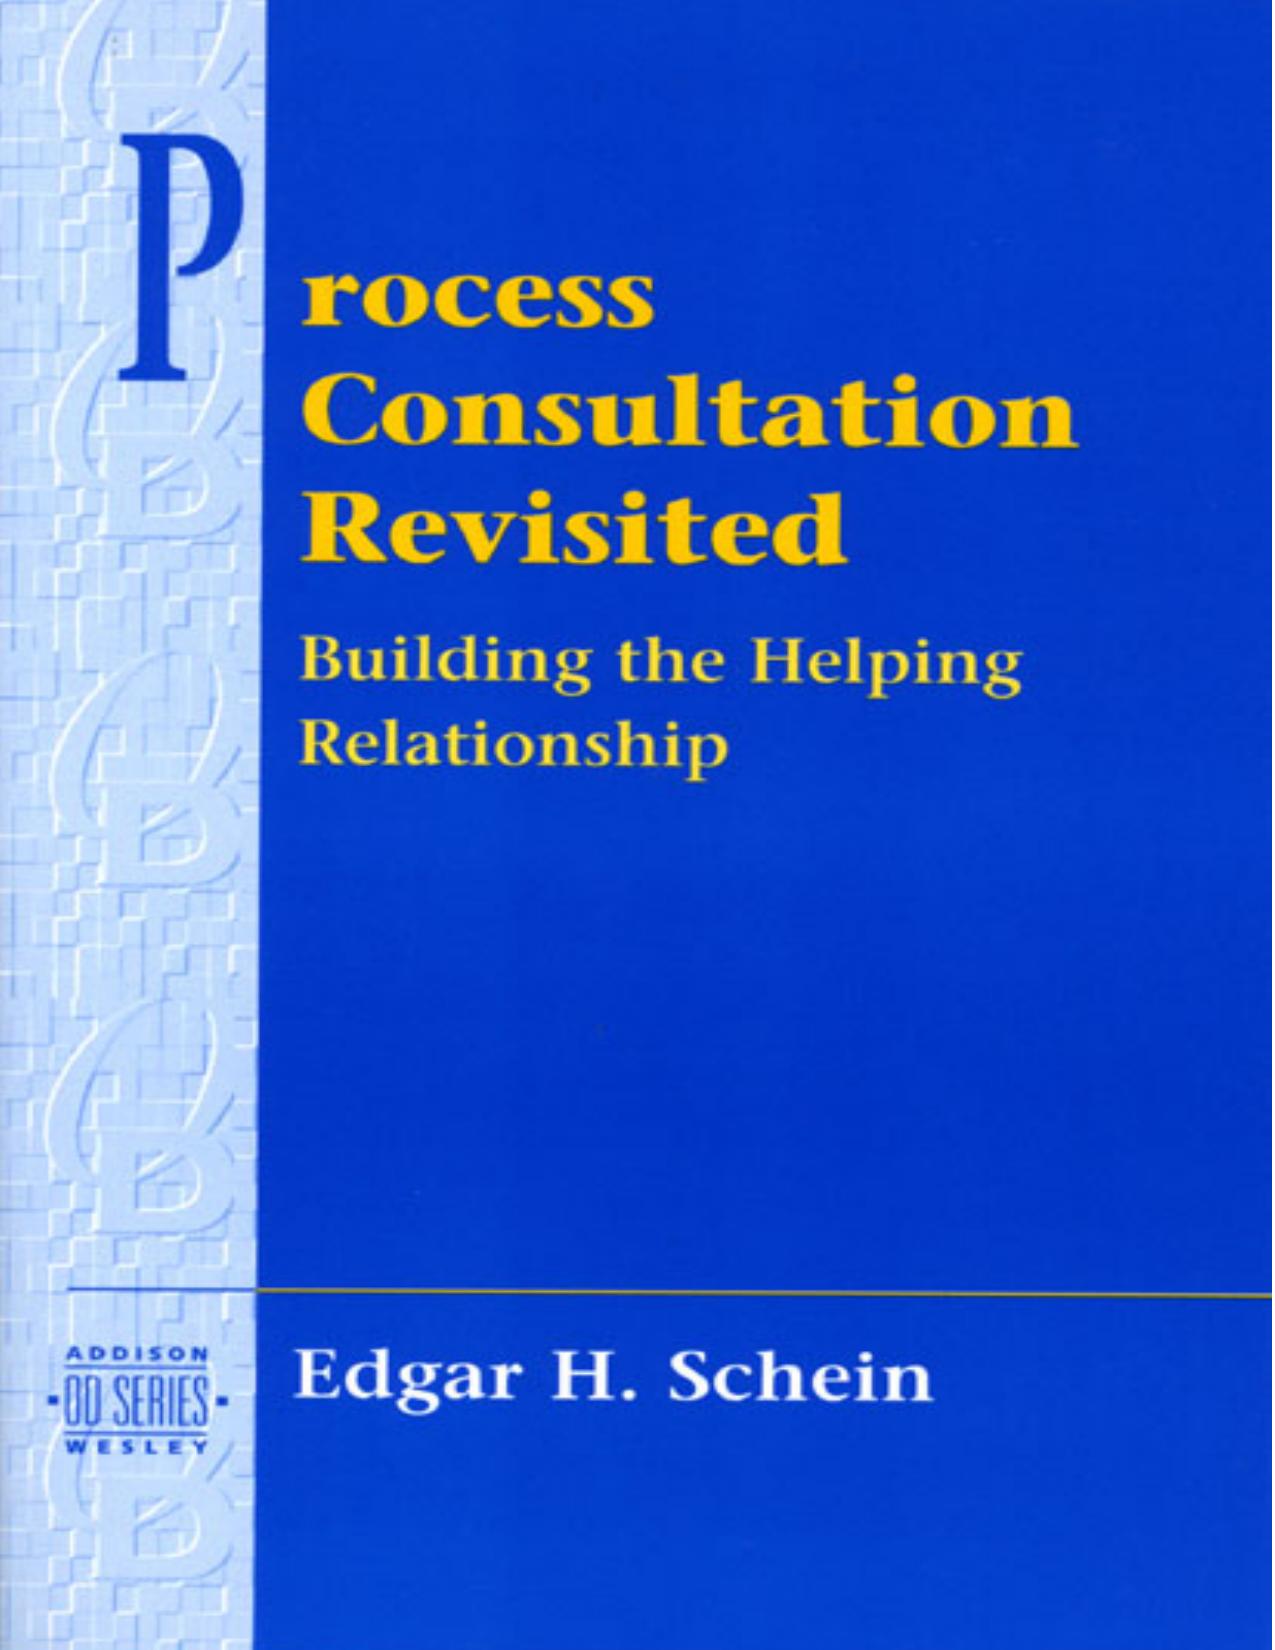 Process Consultation Revisited: Building the Helping Relationship